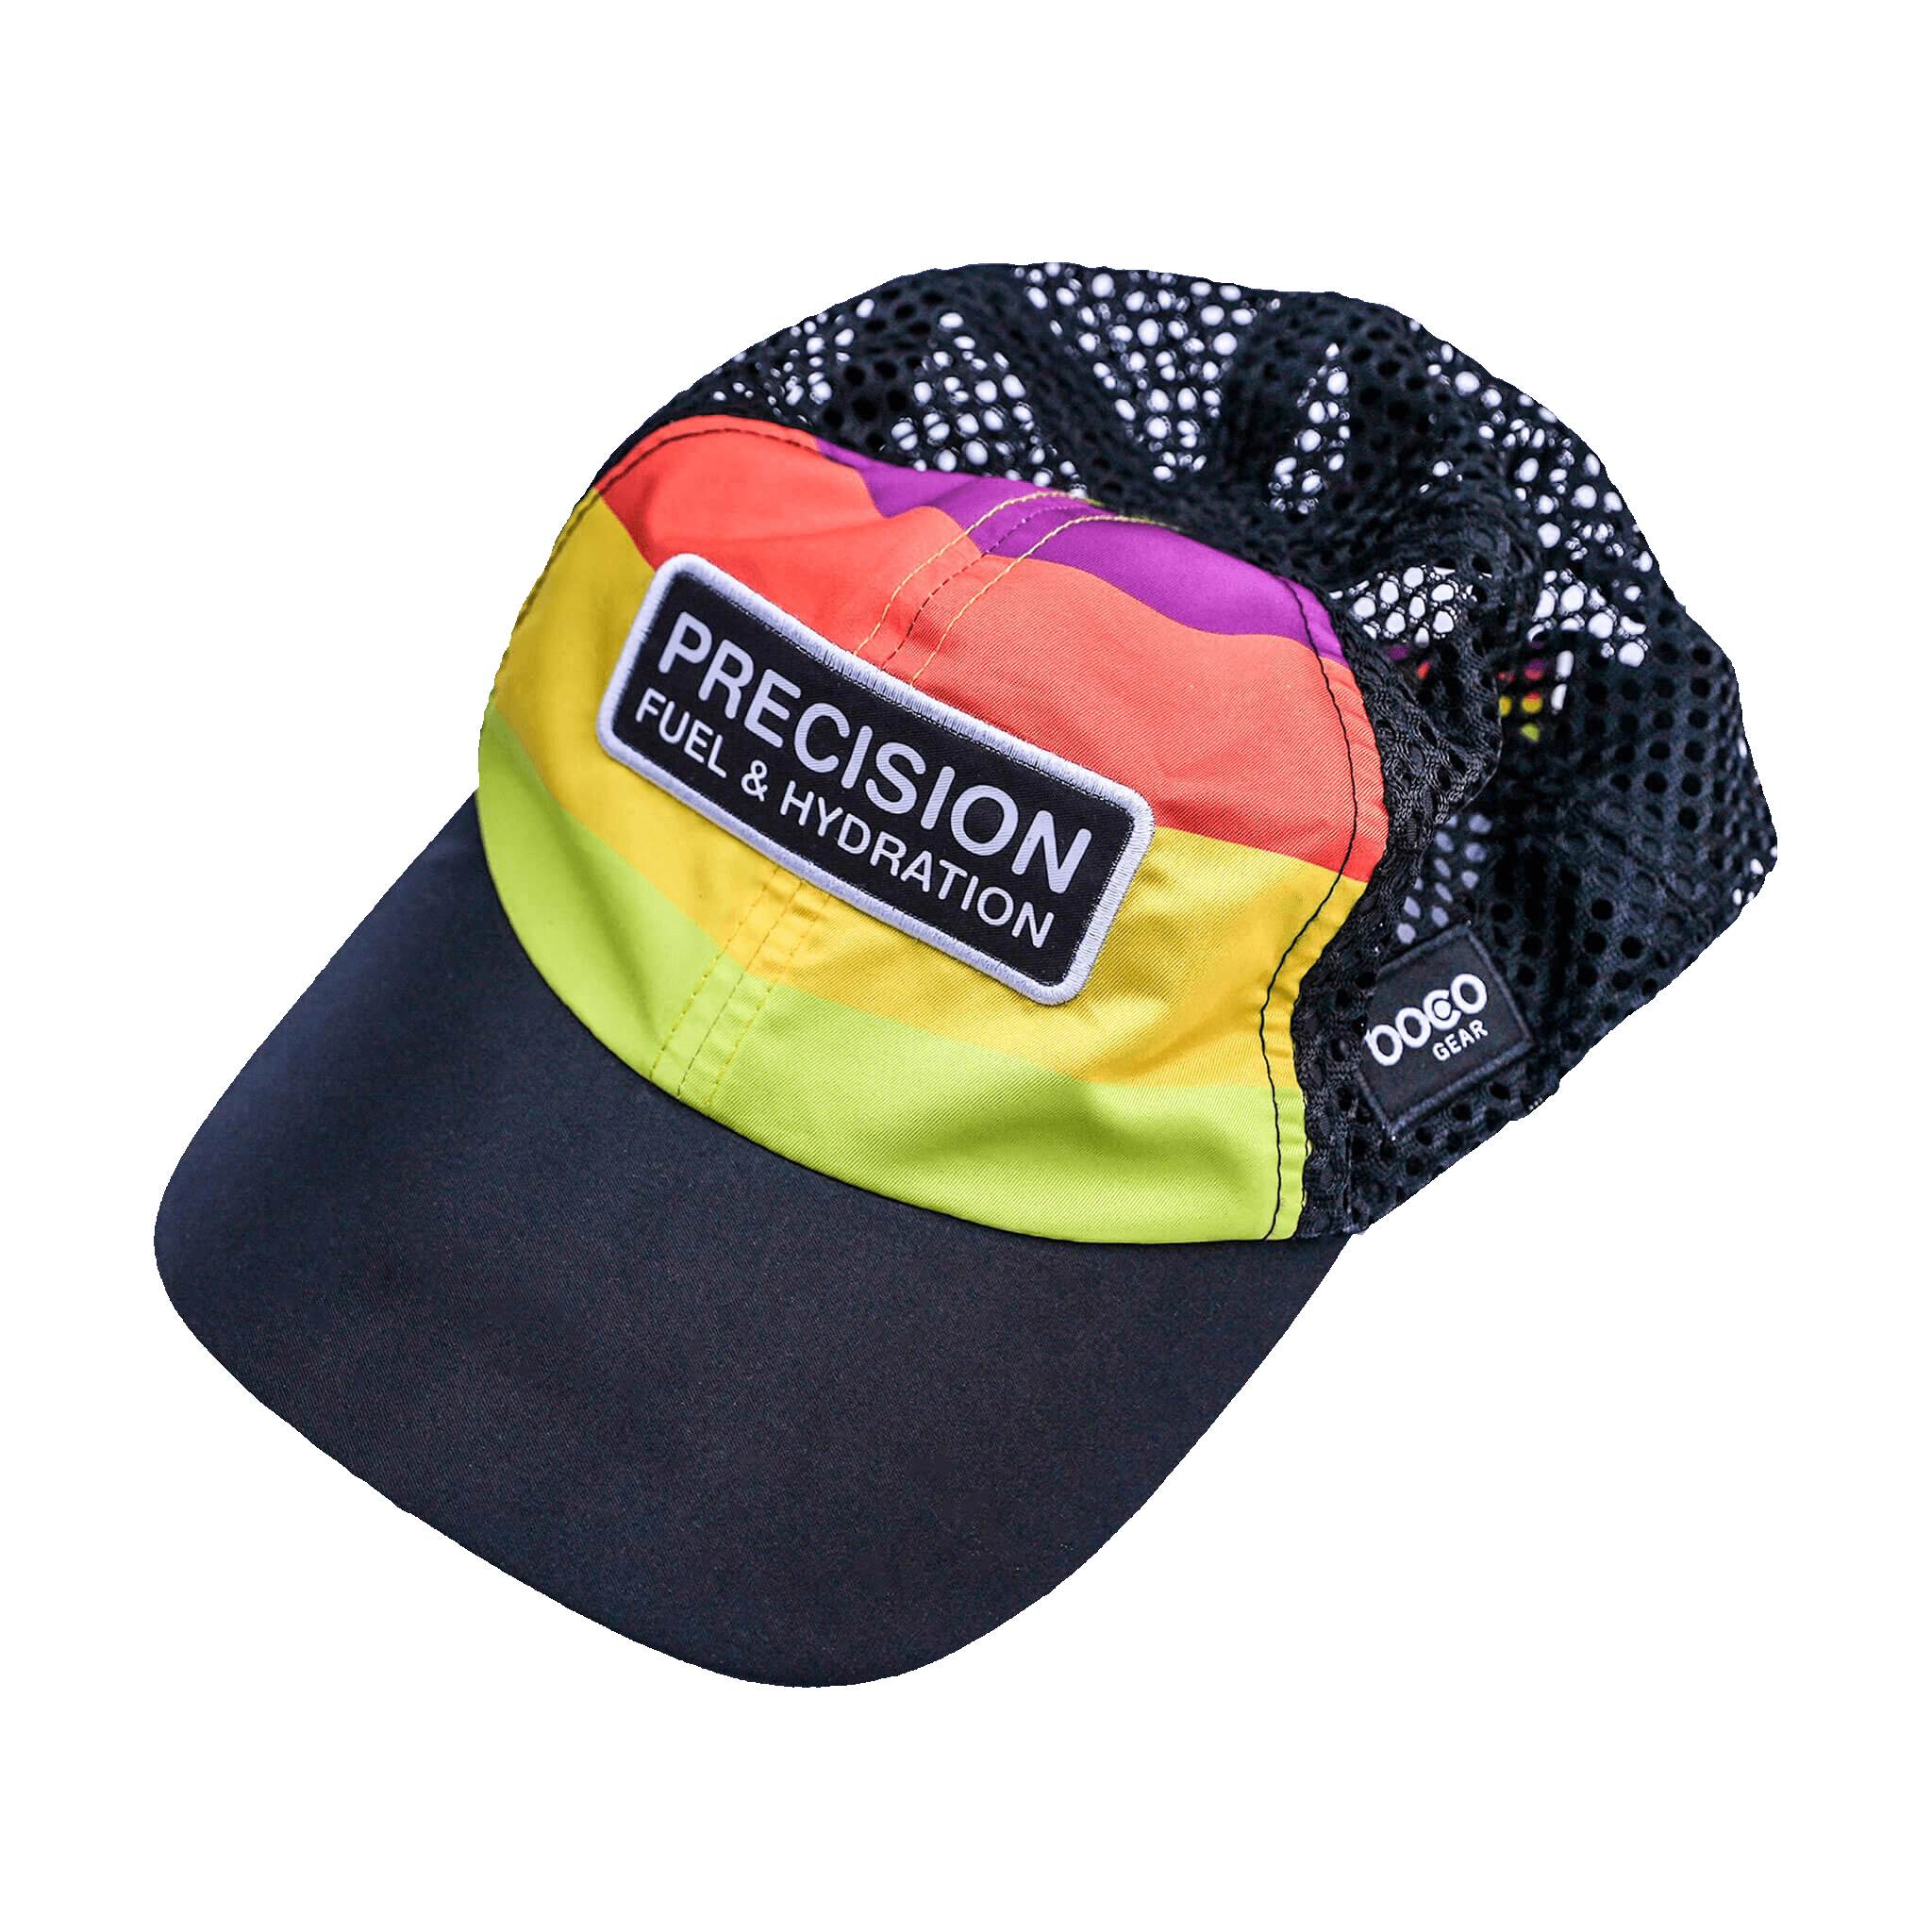 Step Up Your Hat Game W. Our Performance Hats! 100% waterproof - float